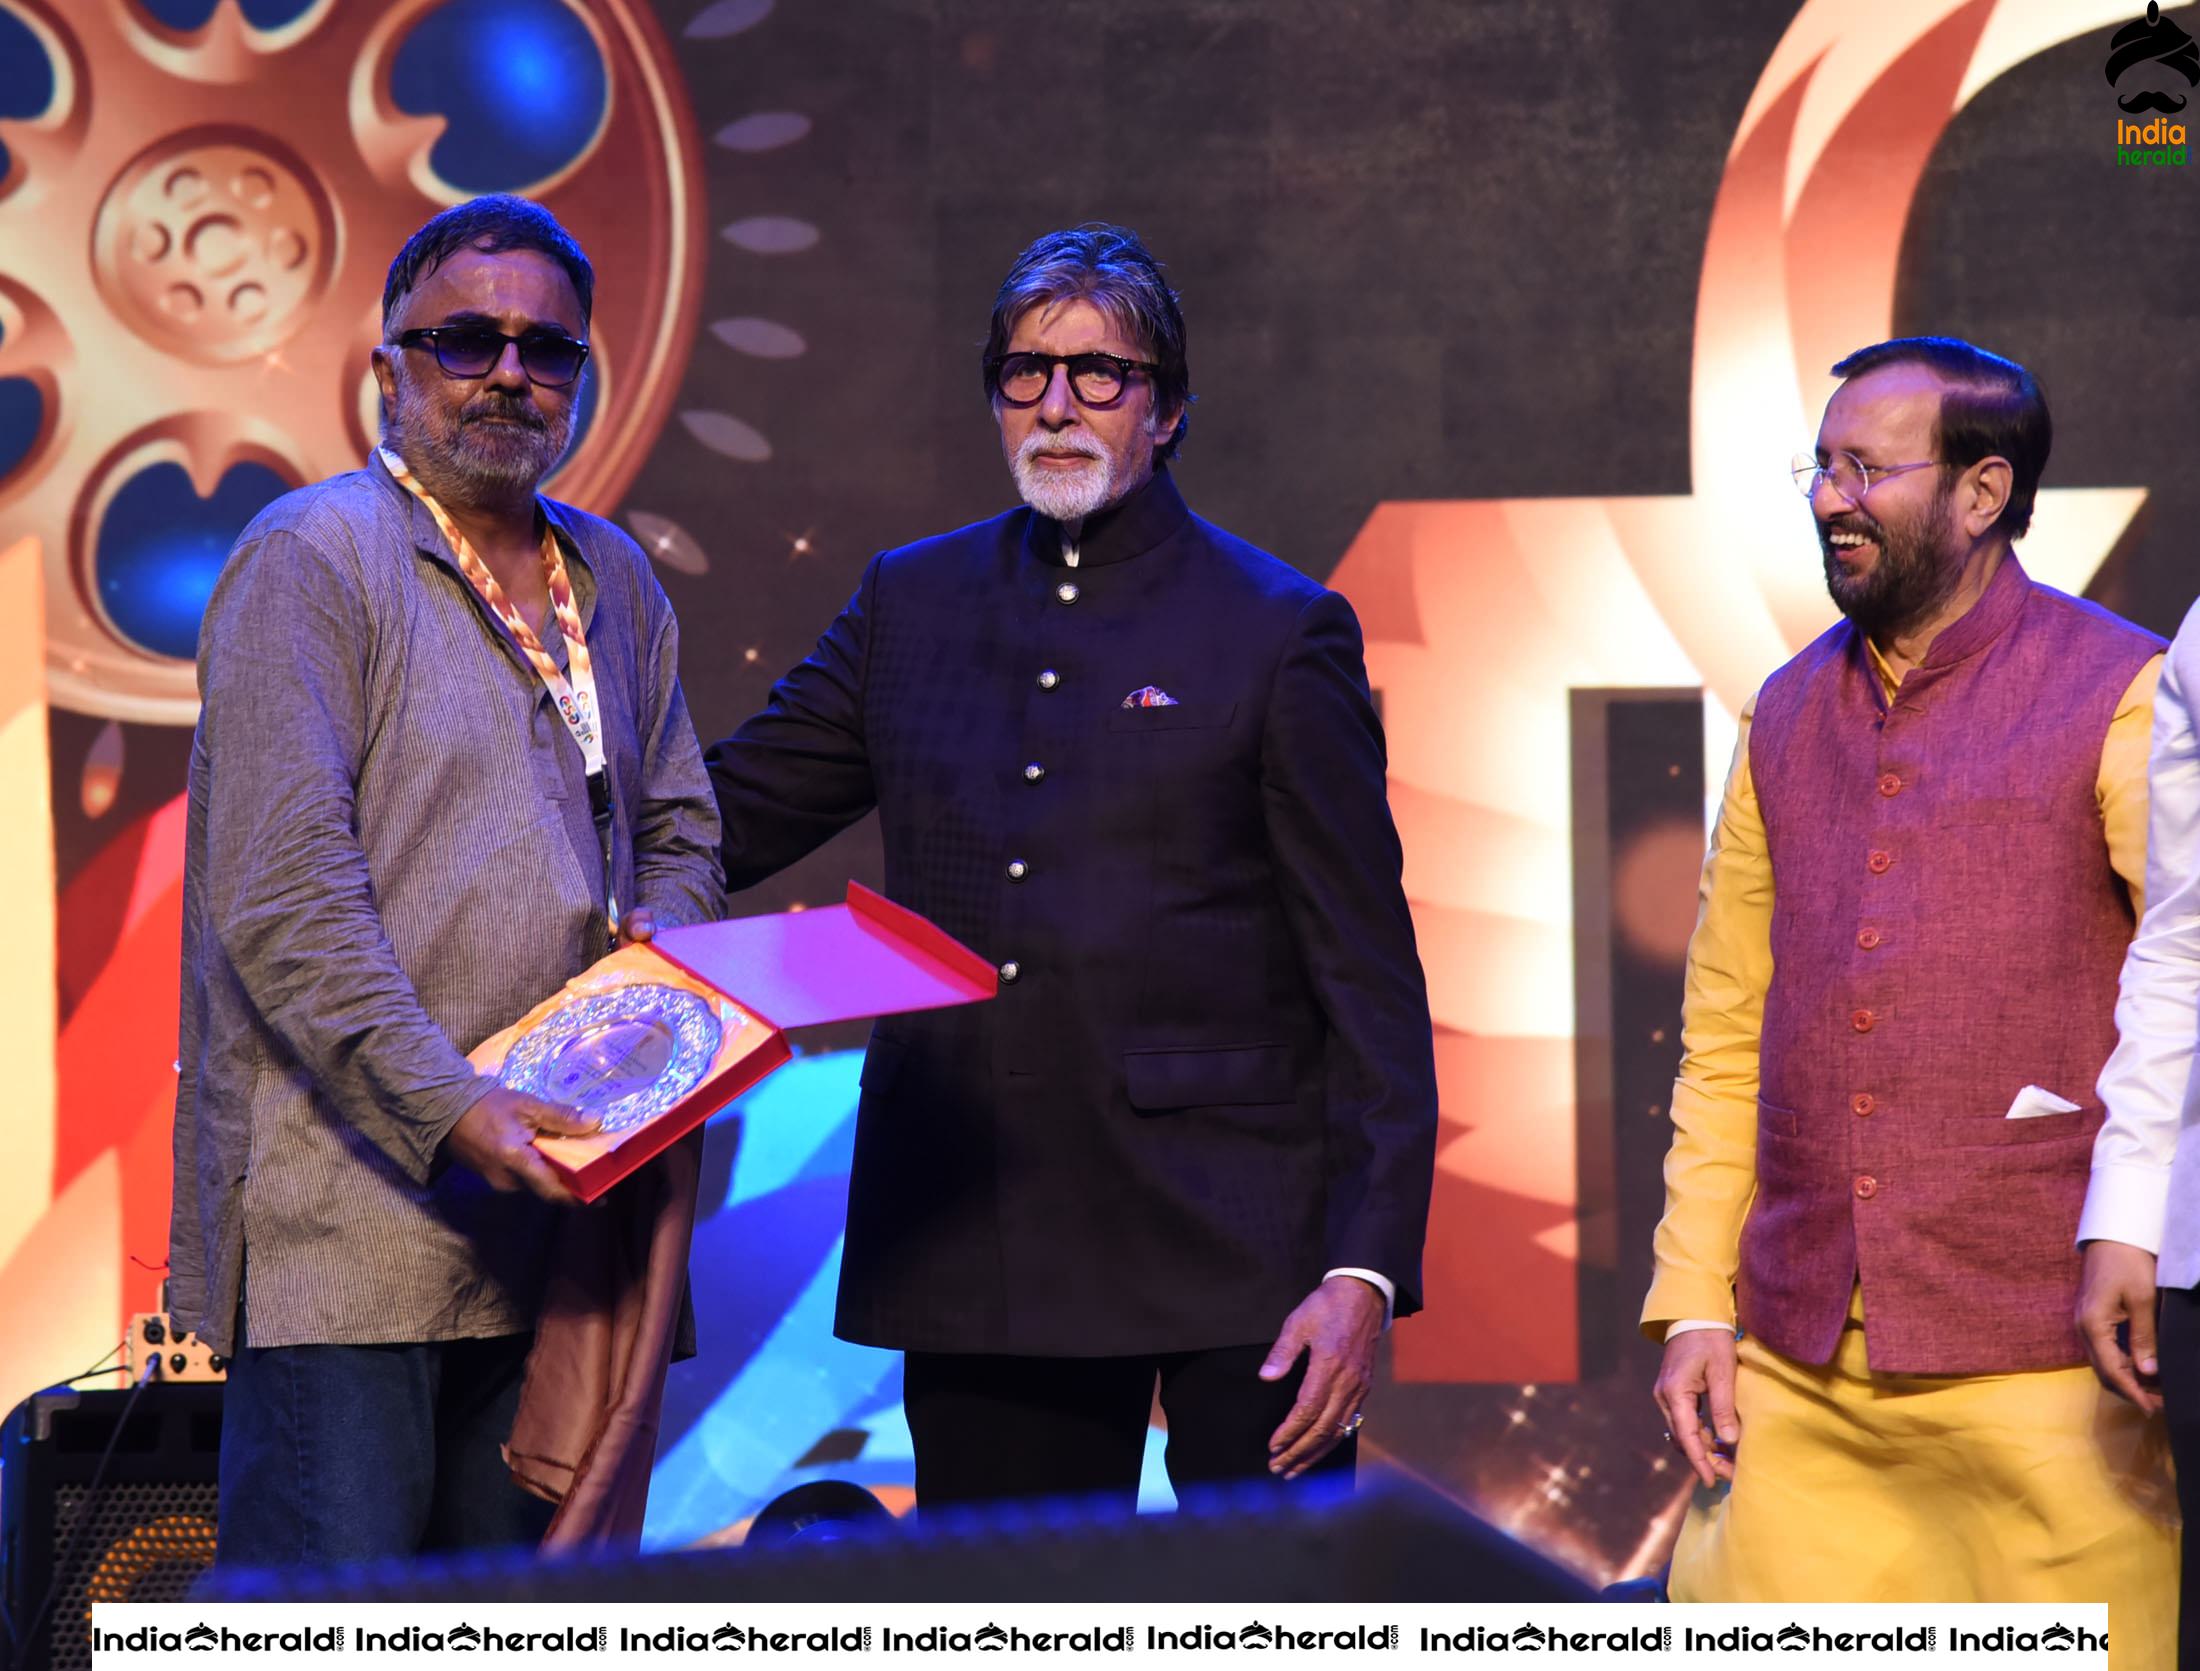 Ministry Of Information and Broadcasting honors Cinematographer PC Sreeram